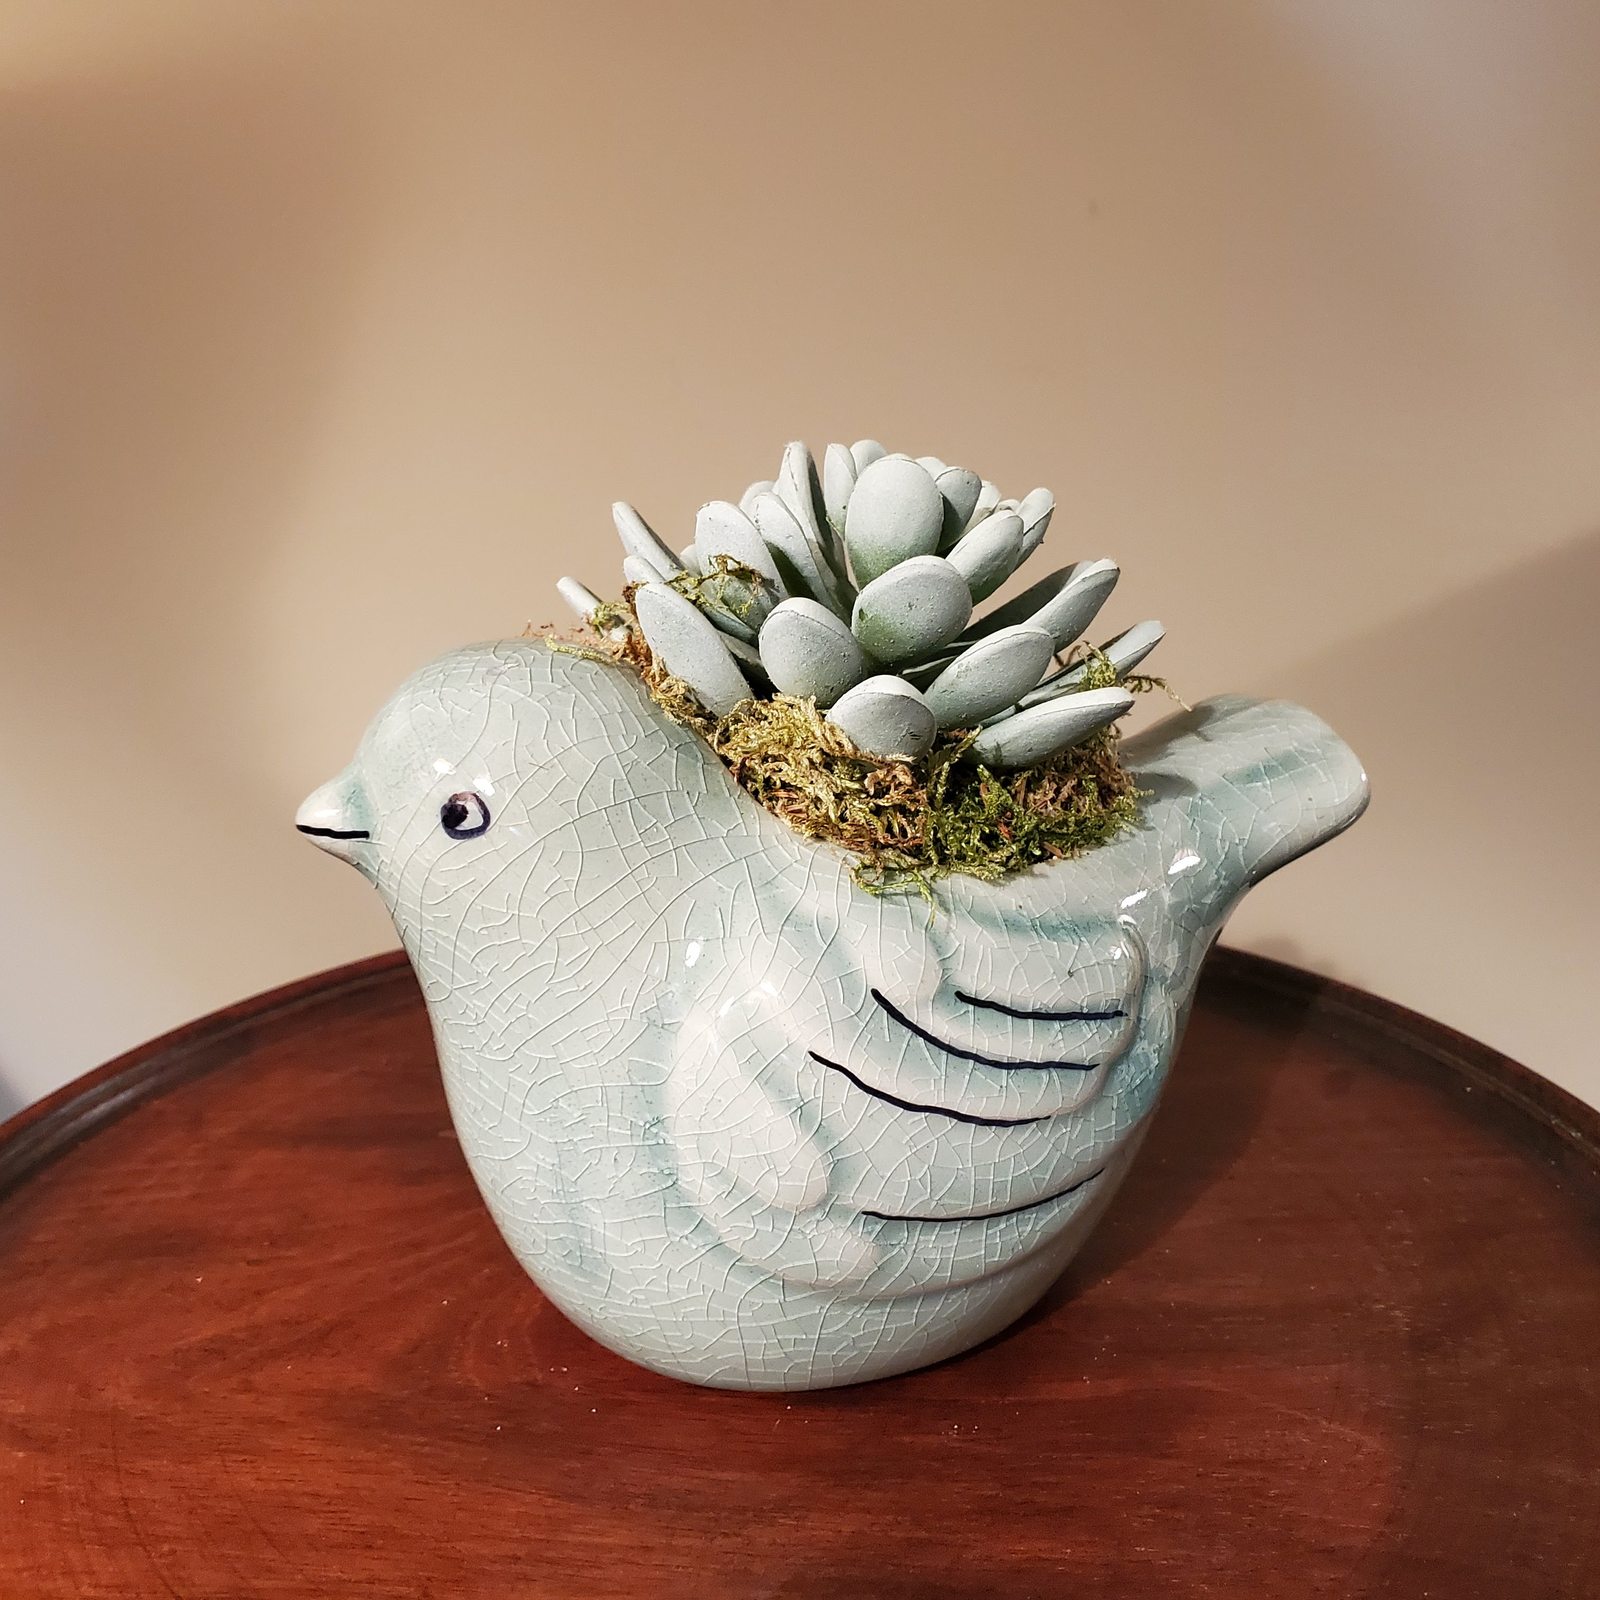 Primary image for Bird Planter with Faux Succulent, Seafoam Green Pot with Artificial Fake Plant